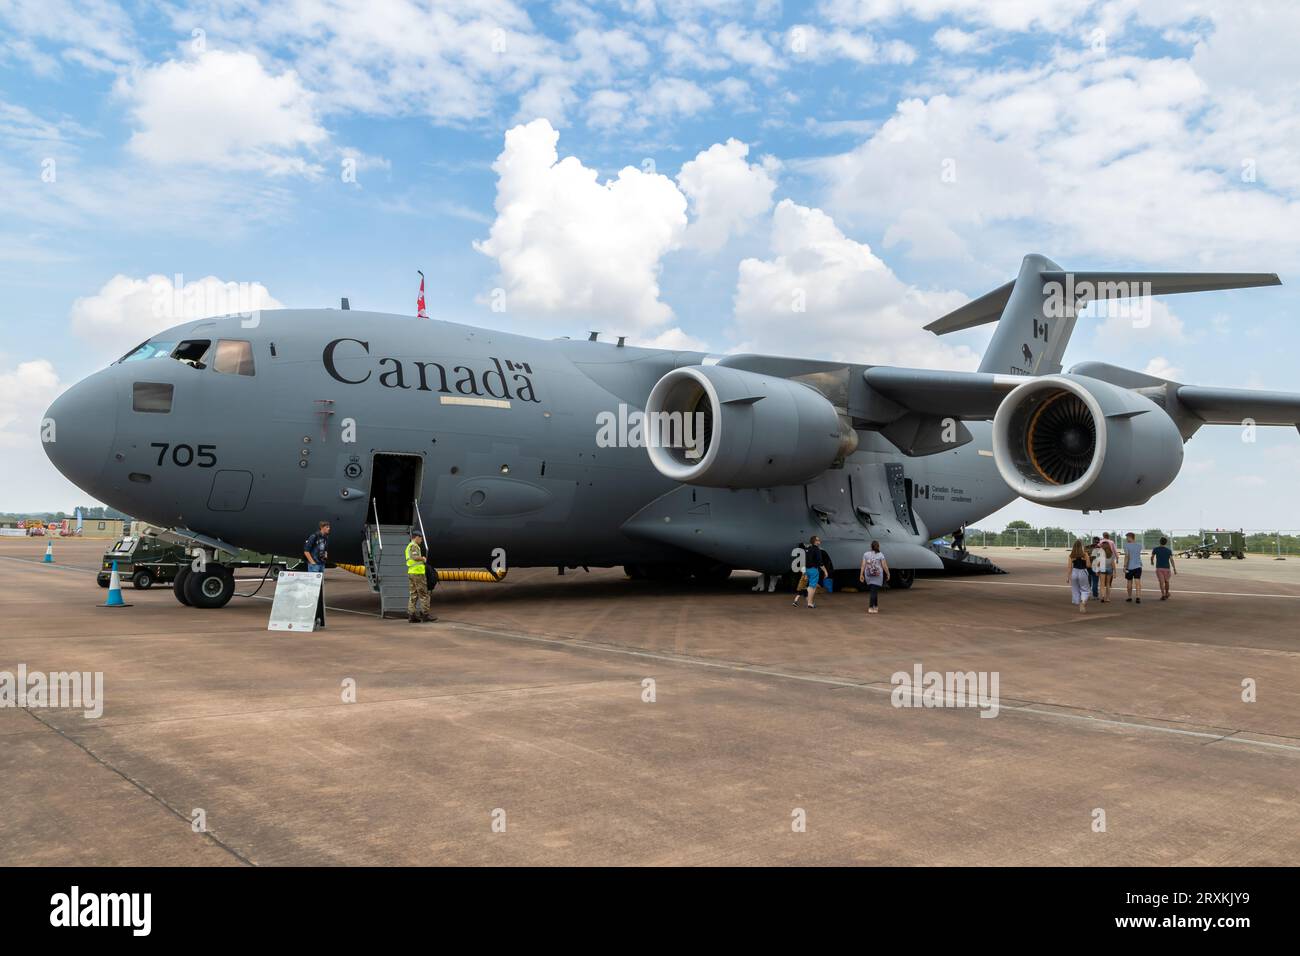 Canadian Armed Forces C-17A Globemaster III transport plane on the tarmac of RAF Fairford. UK - July 13, 2018 Stock Photo